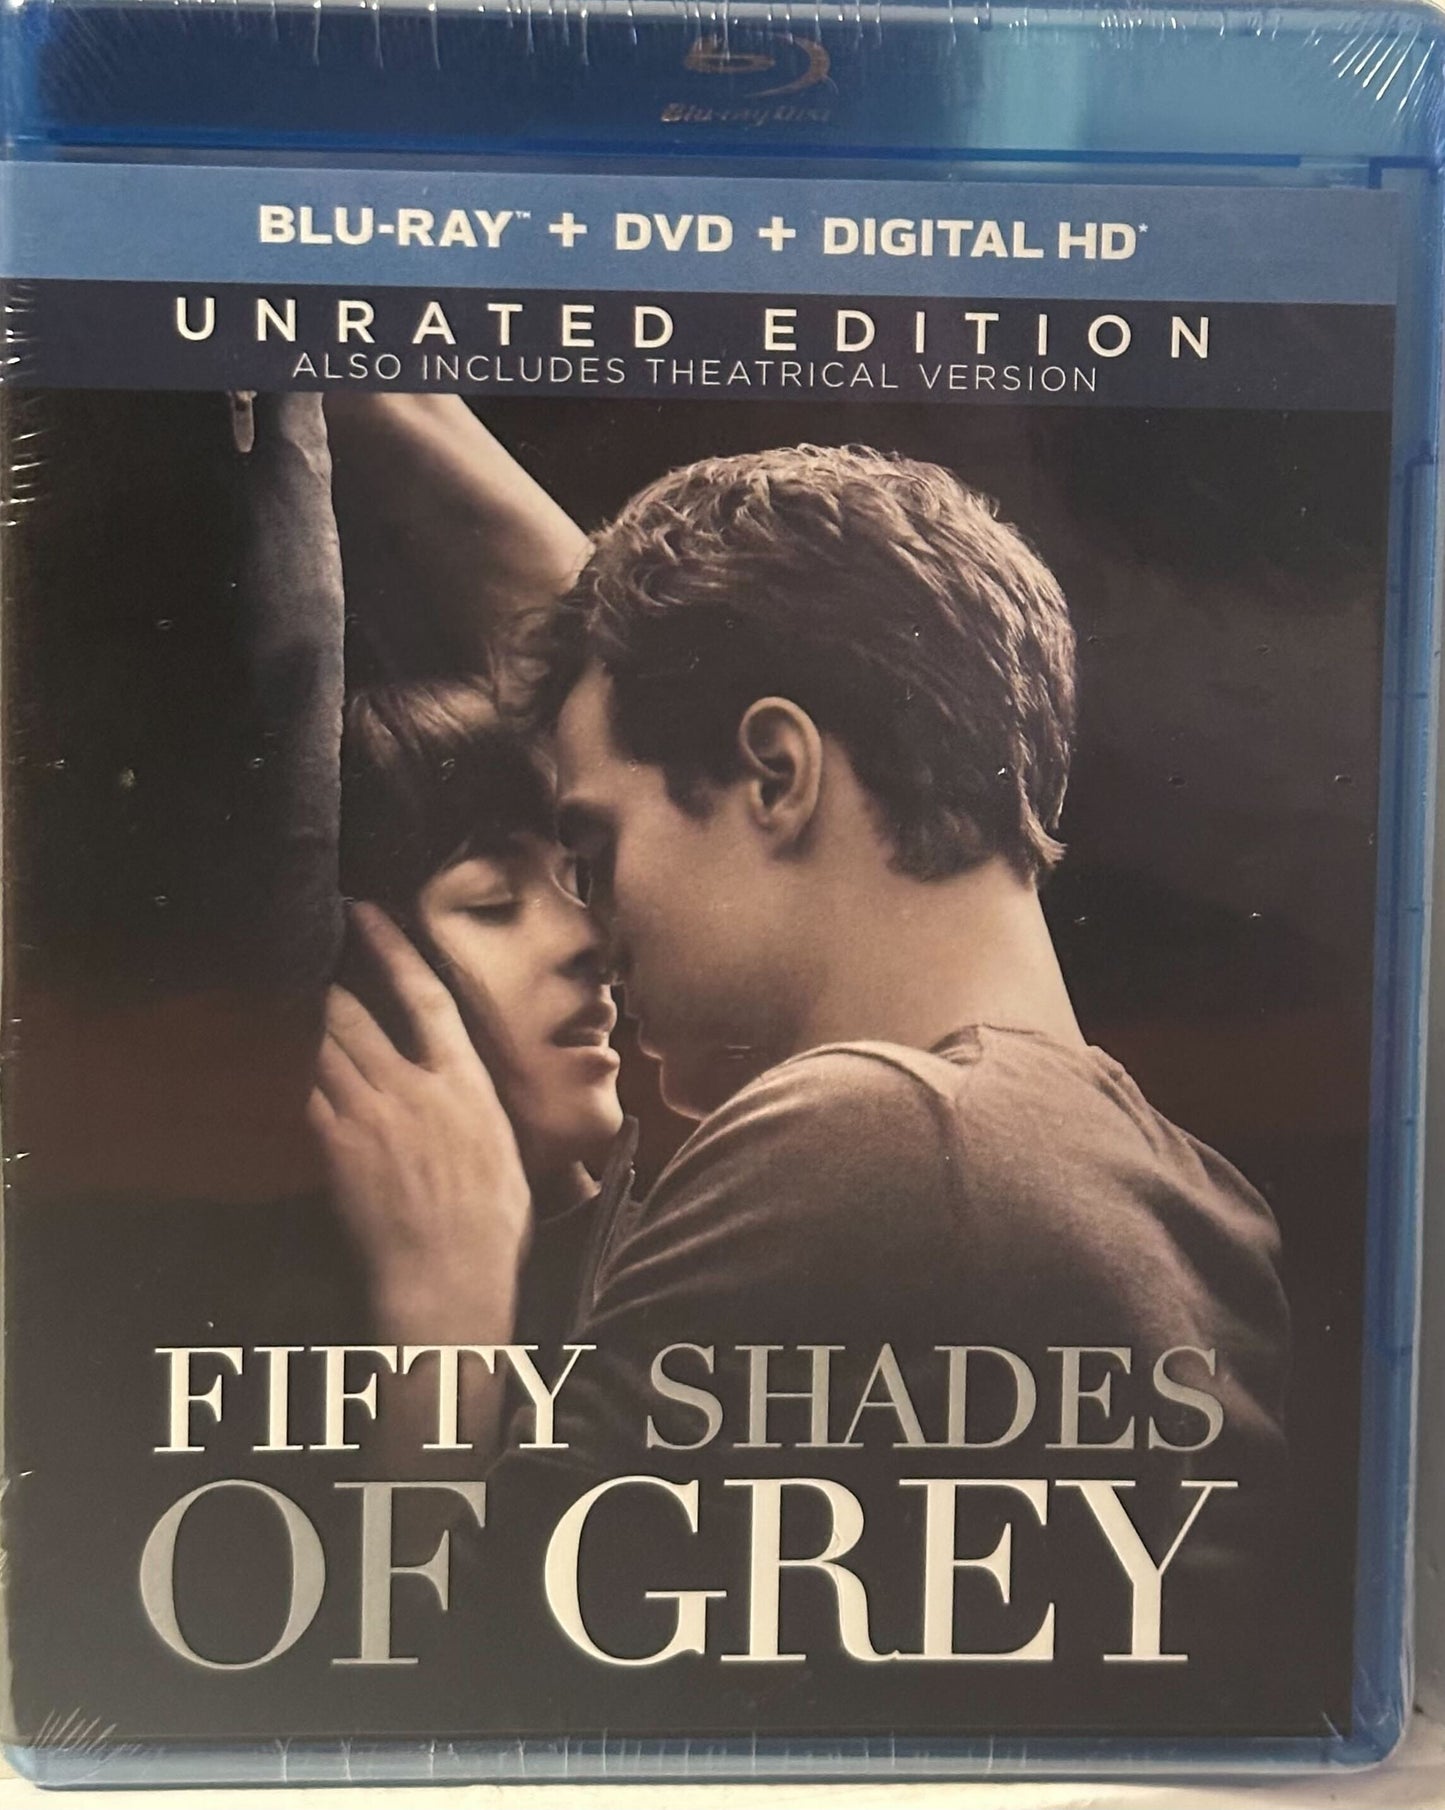 Fifty Shades of Grey (Unrated) Blu-ray + DVD